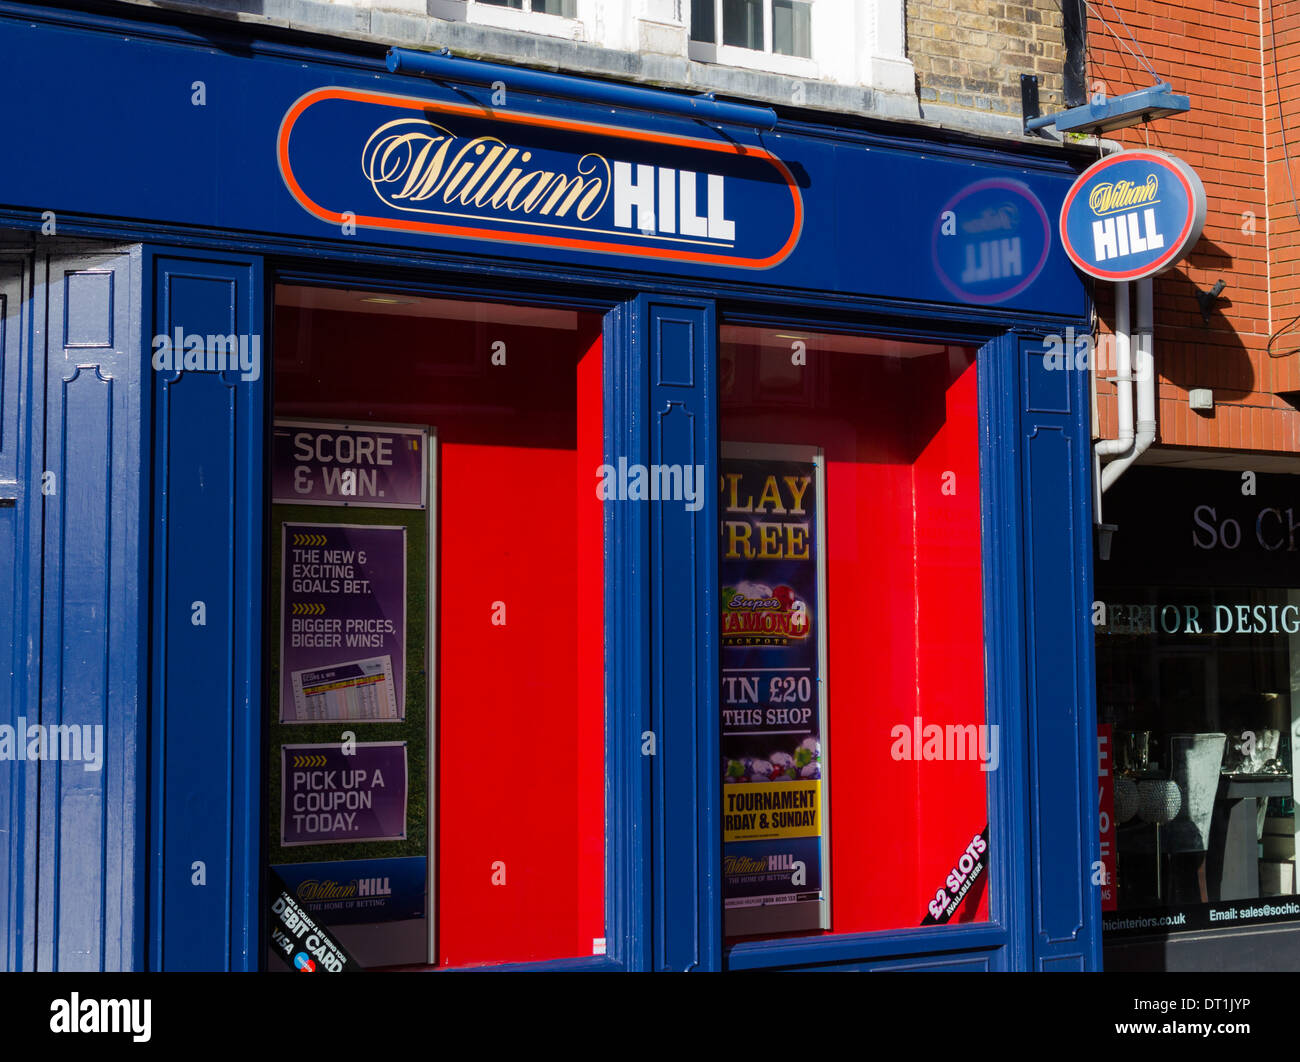 WINDSOR, UK - 1ST FEB 2014: The outside of a William Hill Store during the day Stock Photo